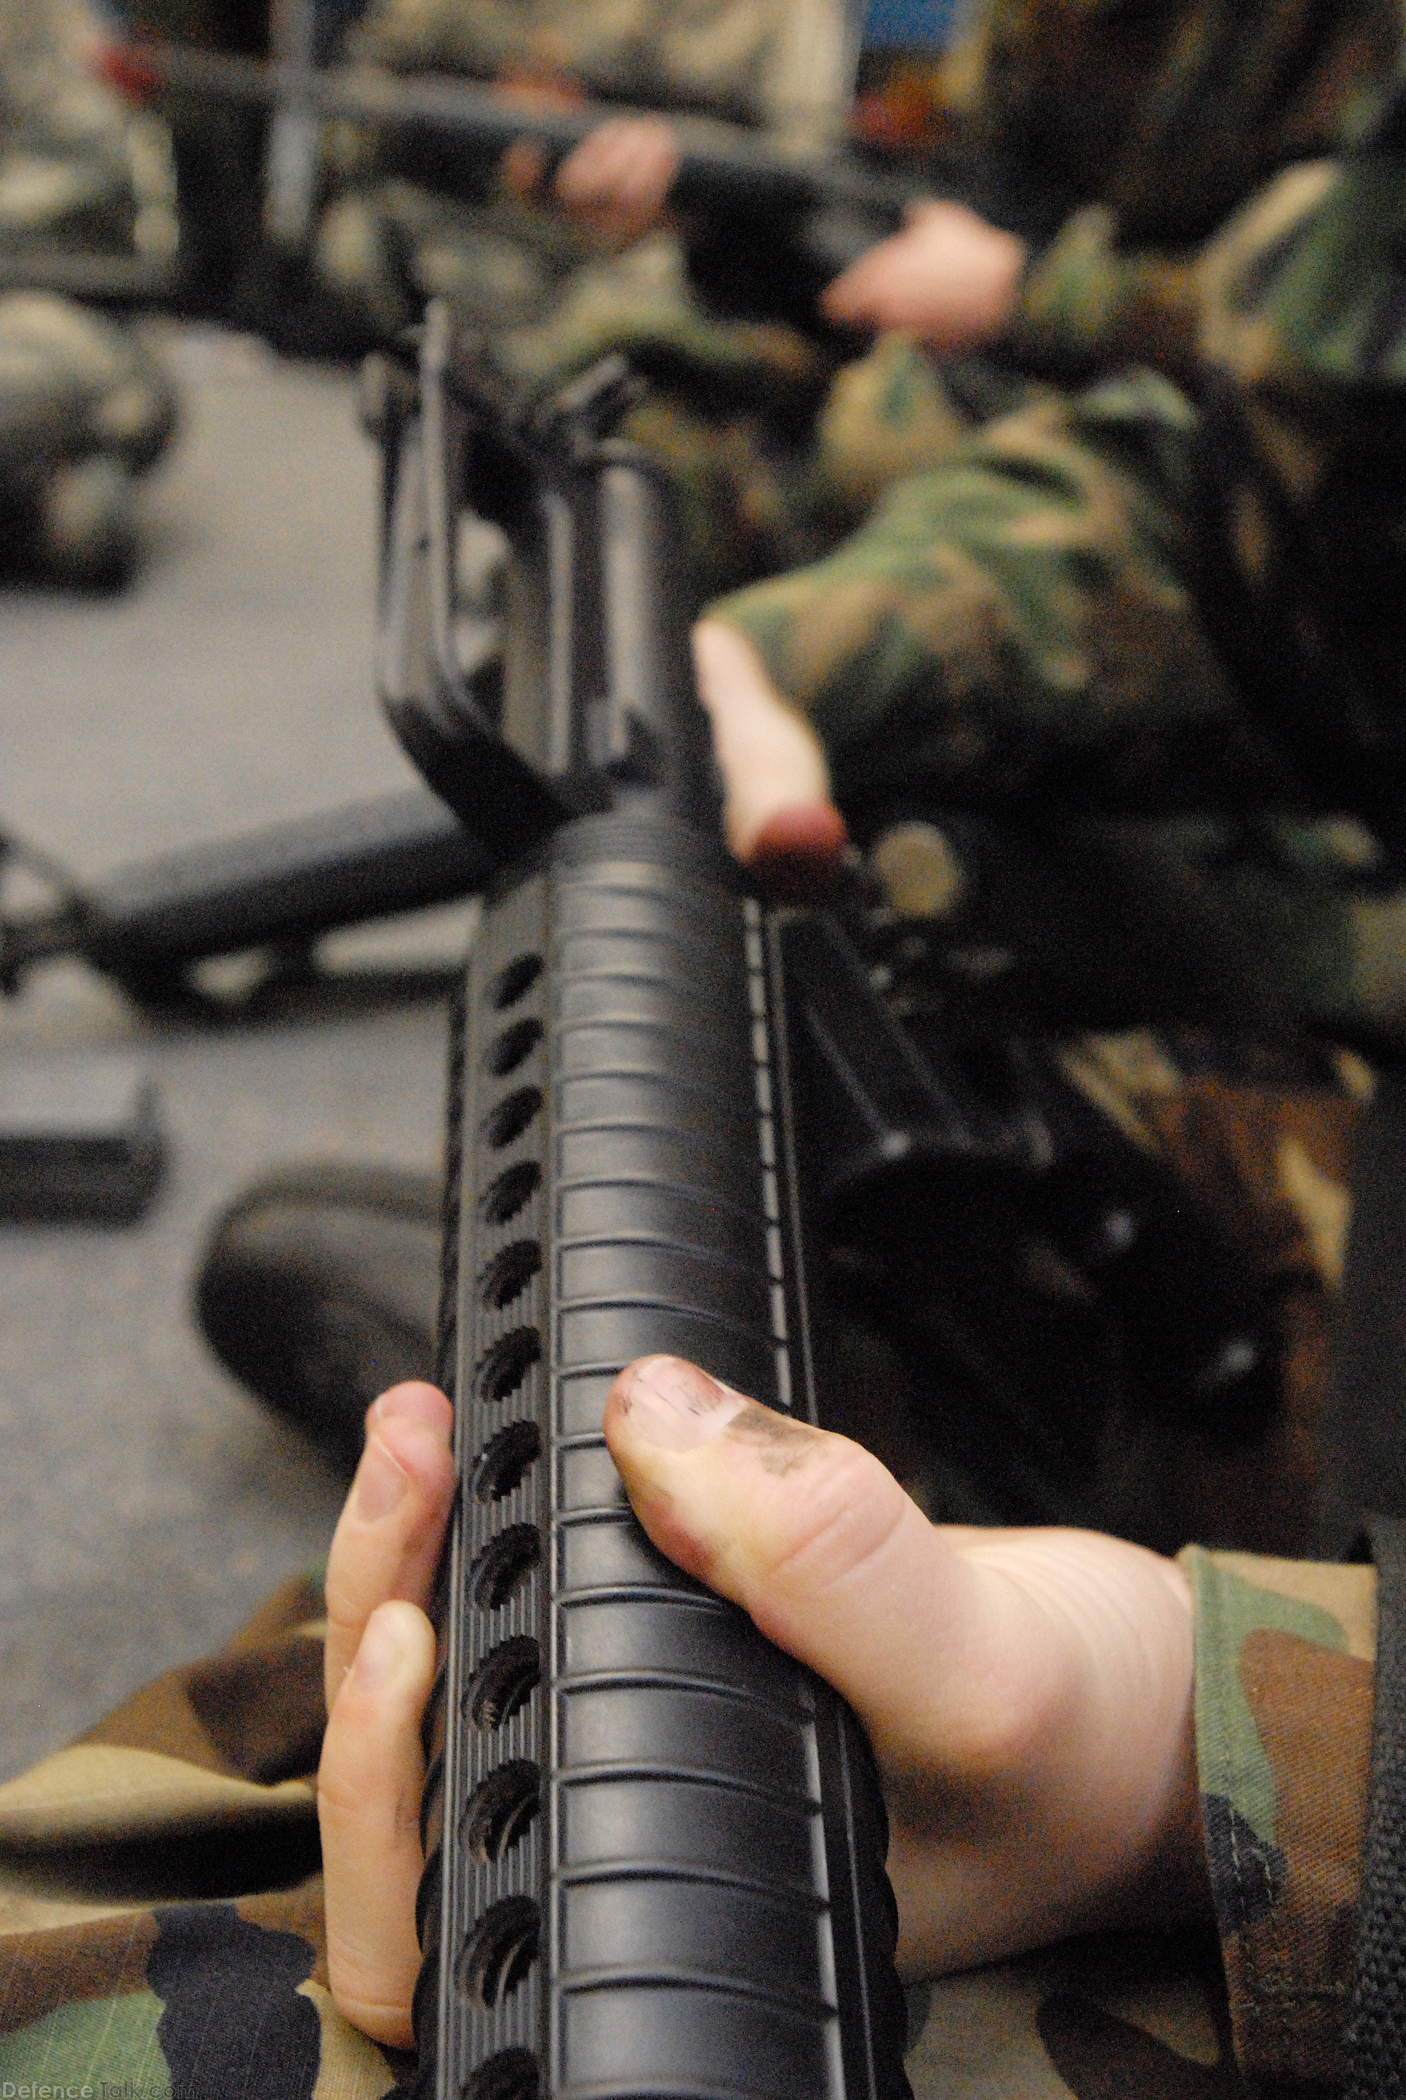 M16A2 during a weapons familiarization class